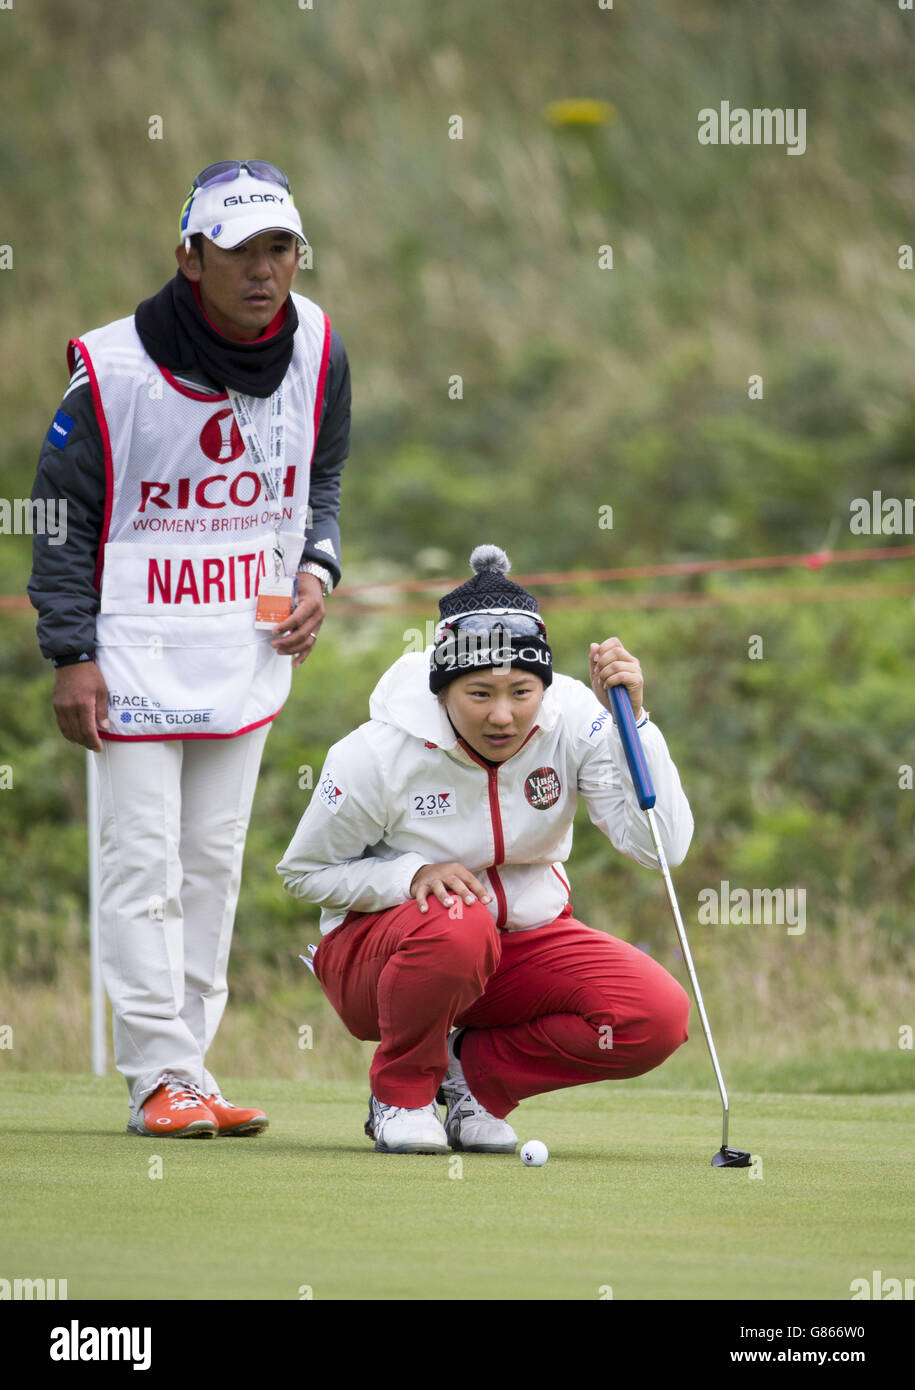 Japan's Misuzu Marita lines up her putt on the 5th hole during day two of the Ricoh Women's British Open at the Trump Turnberry Resort, South Ayrshire. Stock Photo